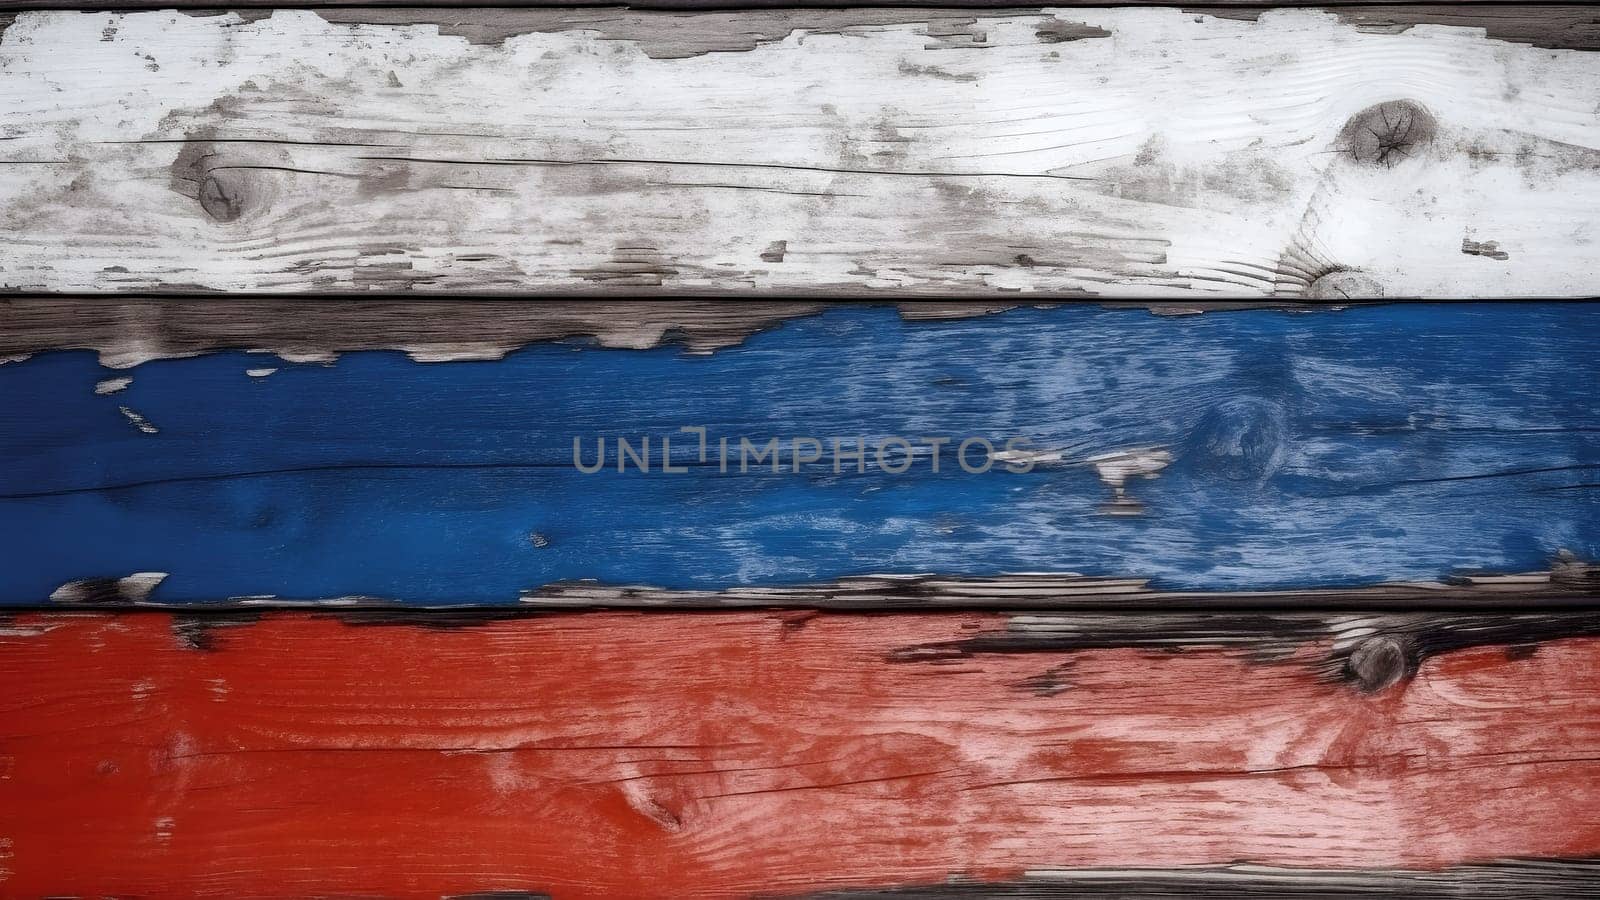 Russian flag colored barn wall, decayed old flaking paint on rotten wood surface. Neural network generated in May 2023. Not based on any actual person, scene or pattern.